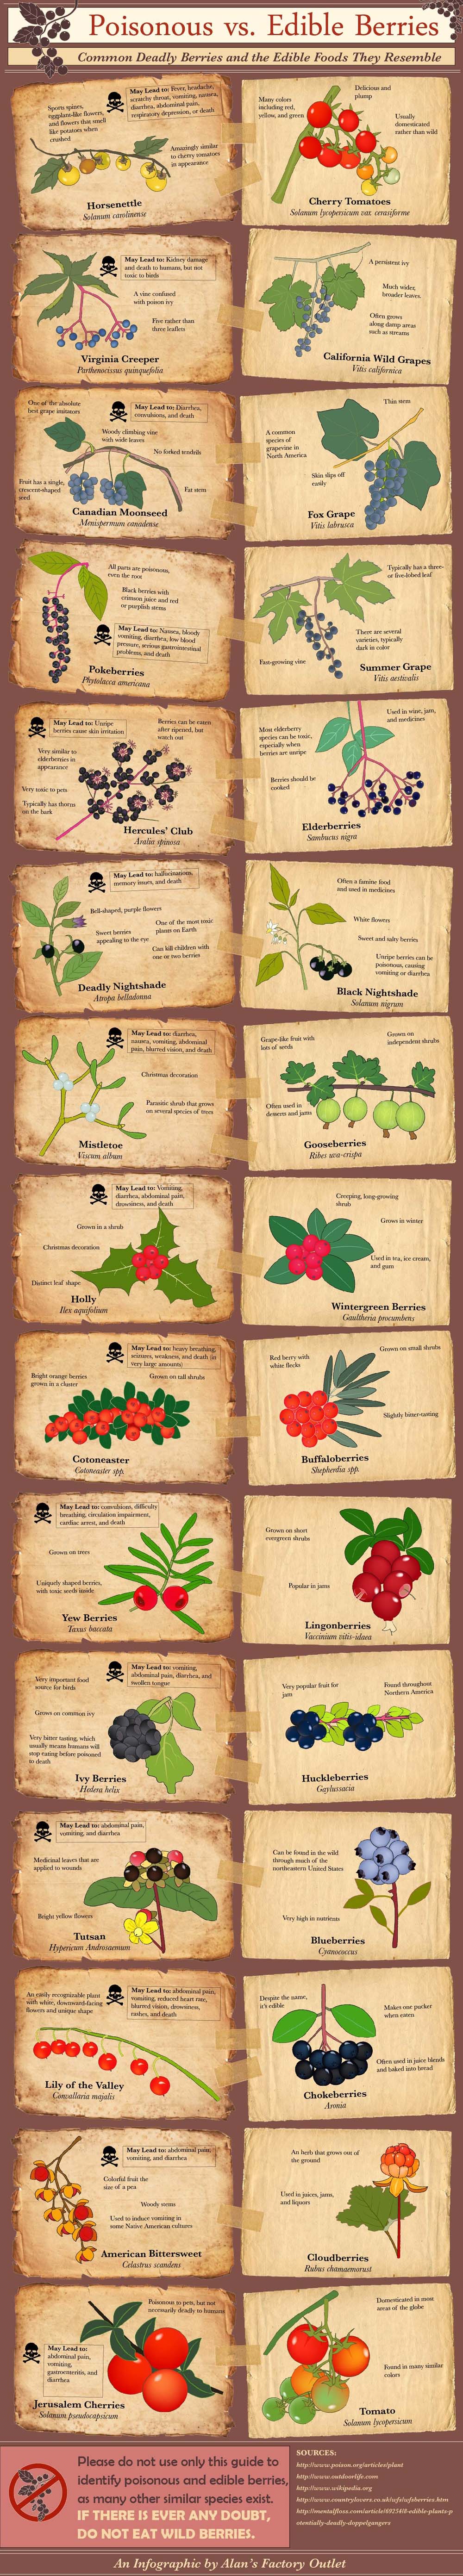 Poisonous vs Edible Berries - Deadly Berries & the Edible Foods They Resemble